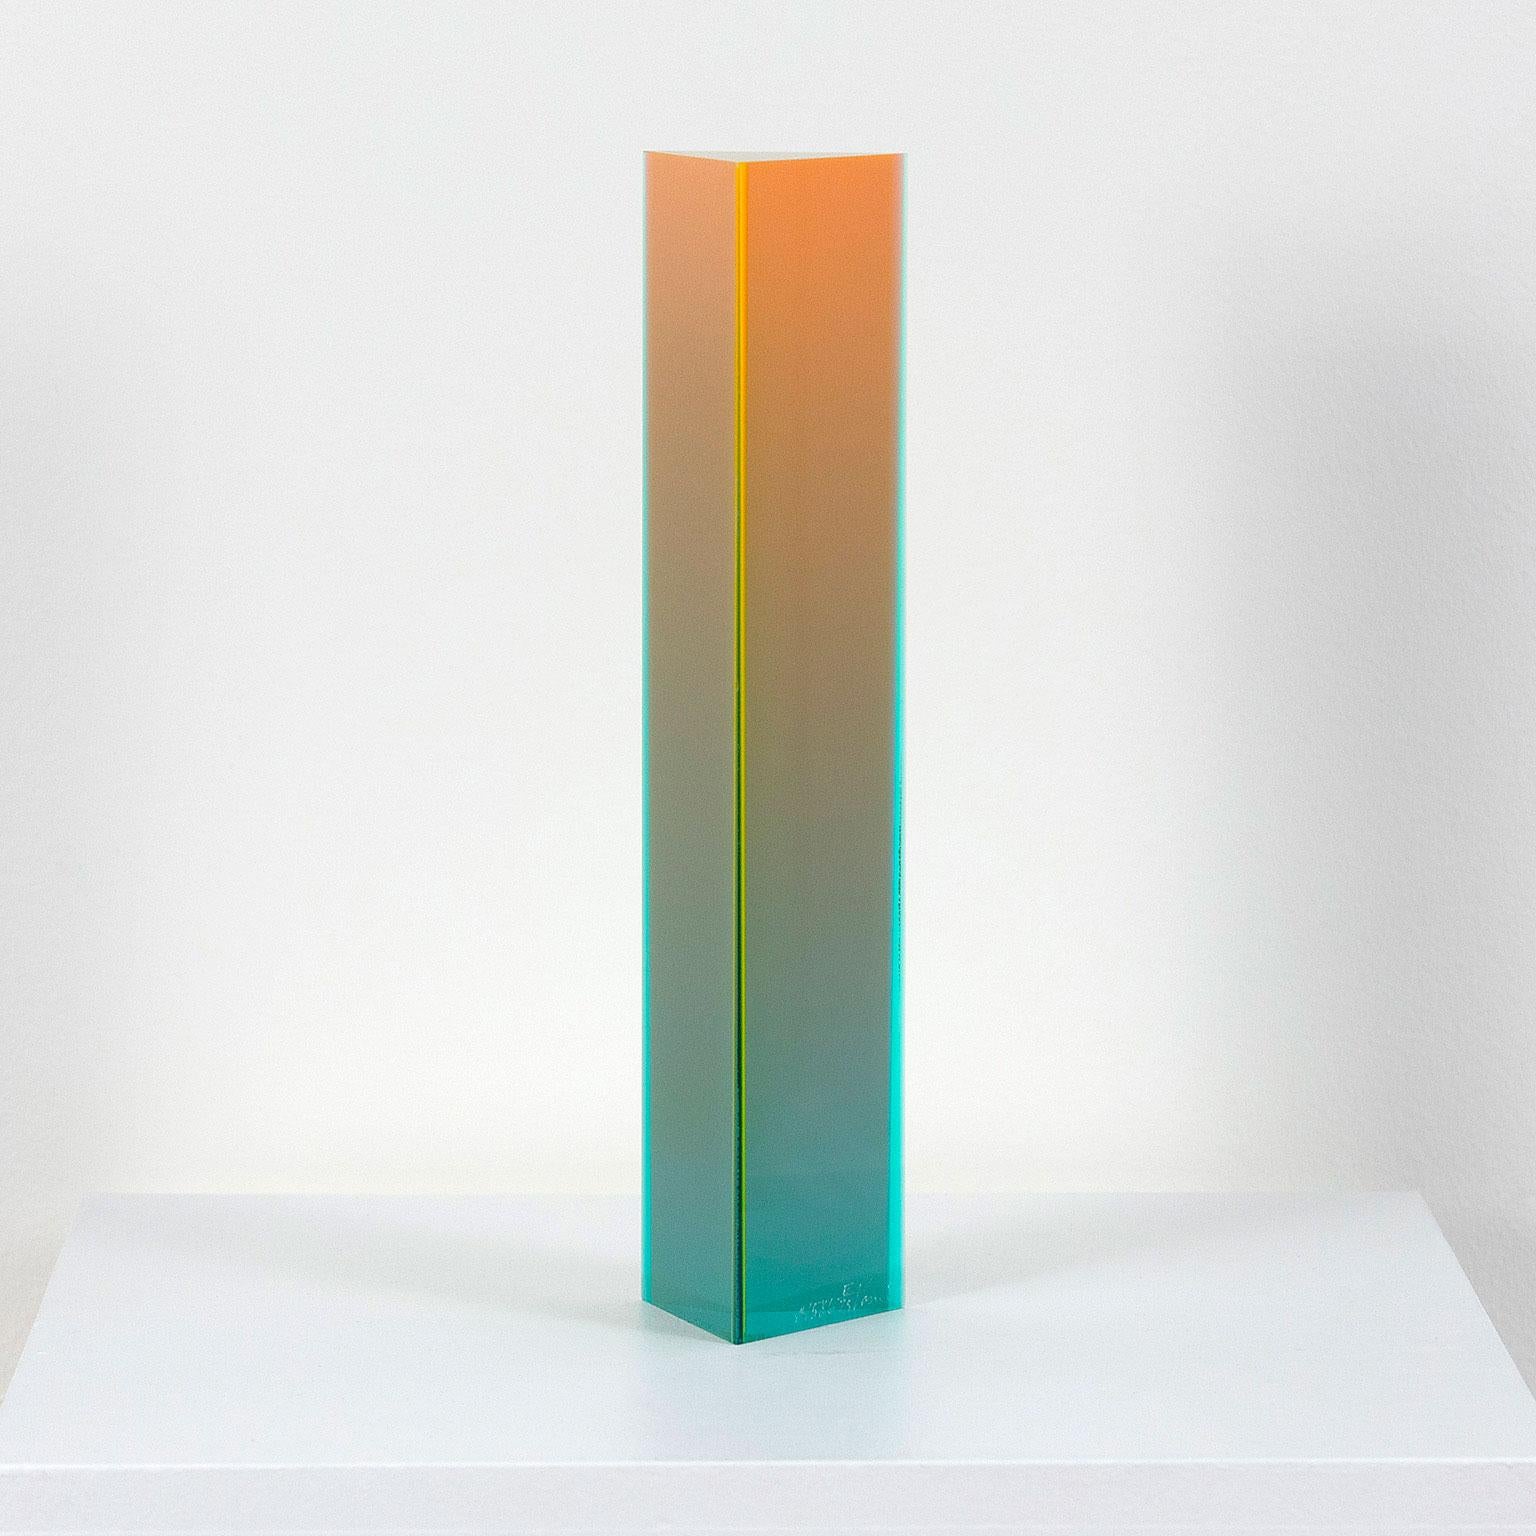 Vasa Velizar Mihich Abstract Sculpture - Tropical Prism